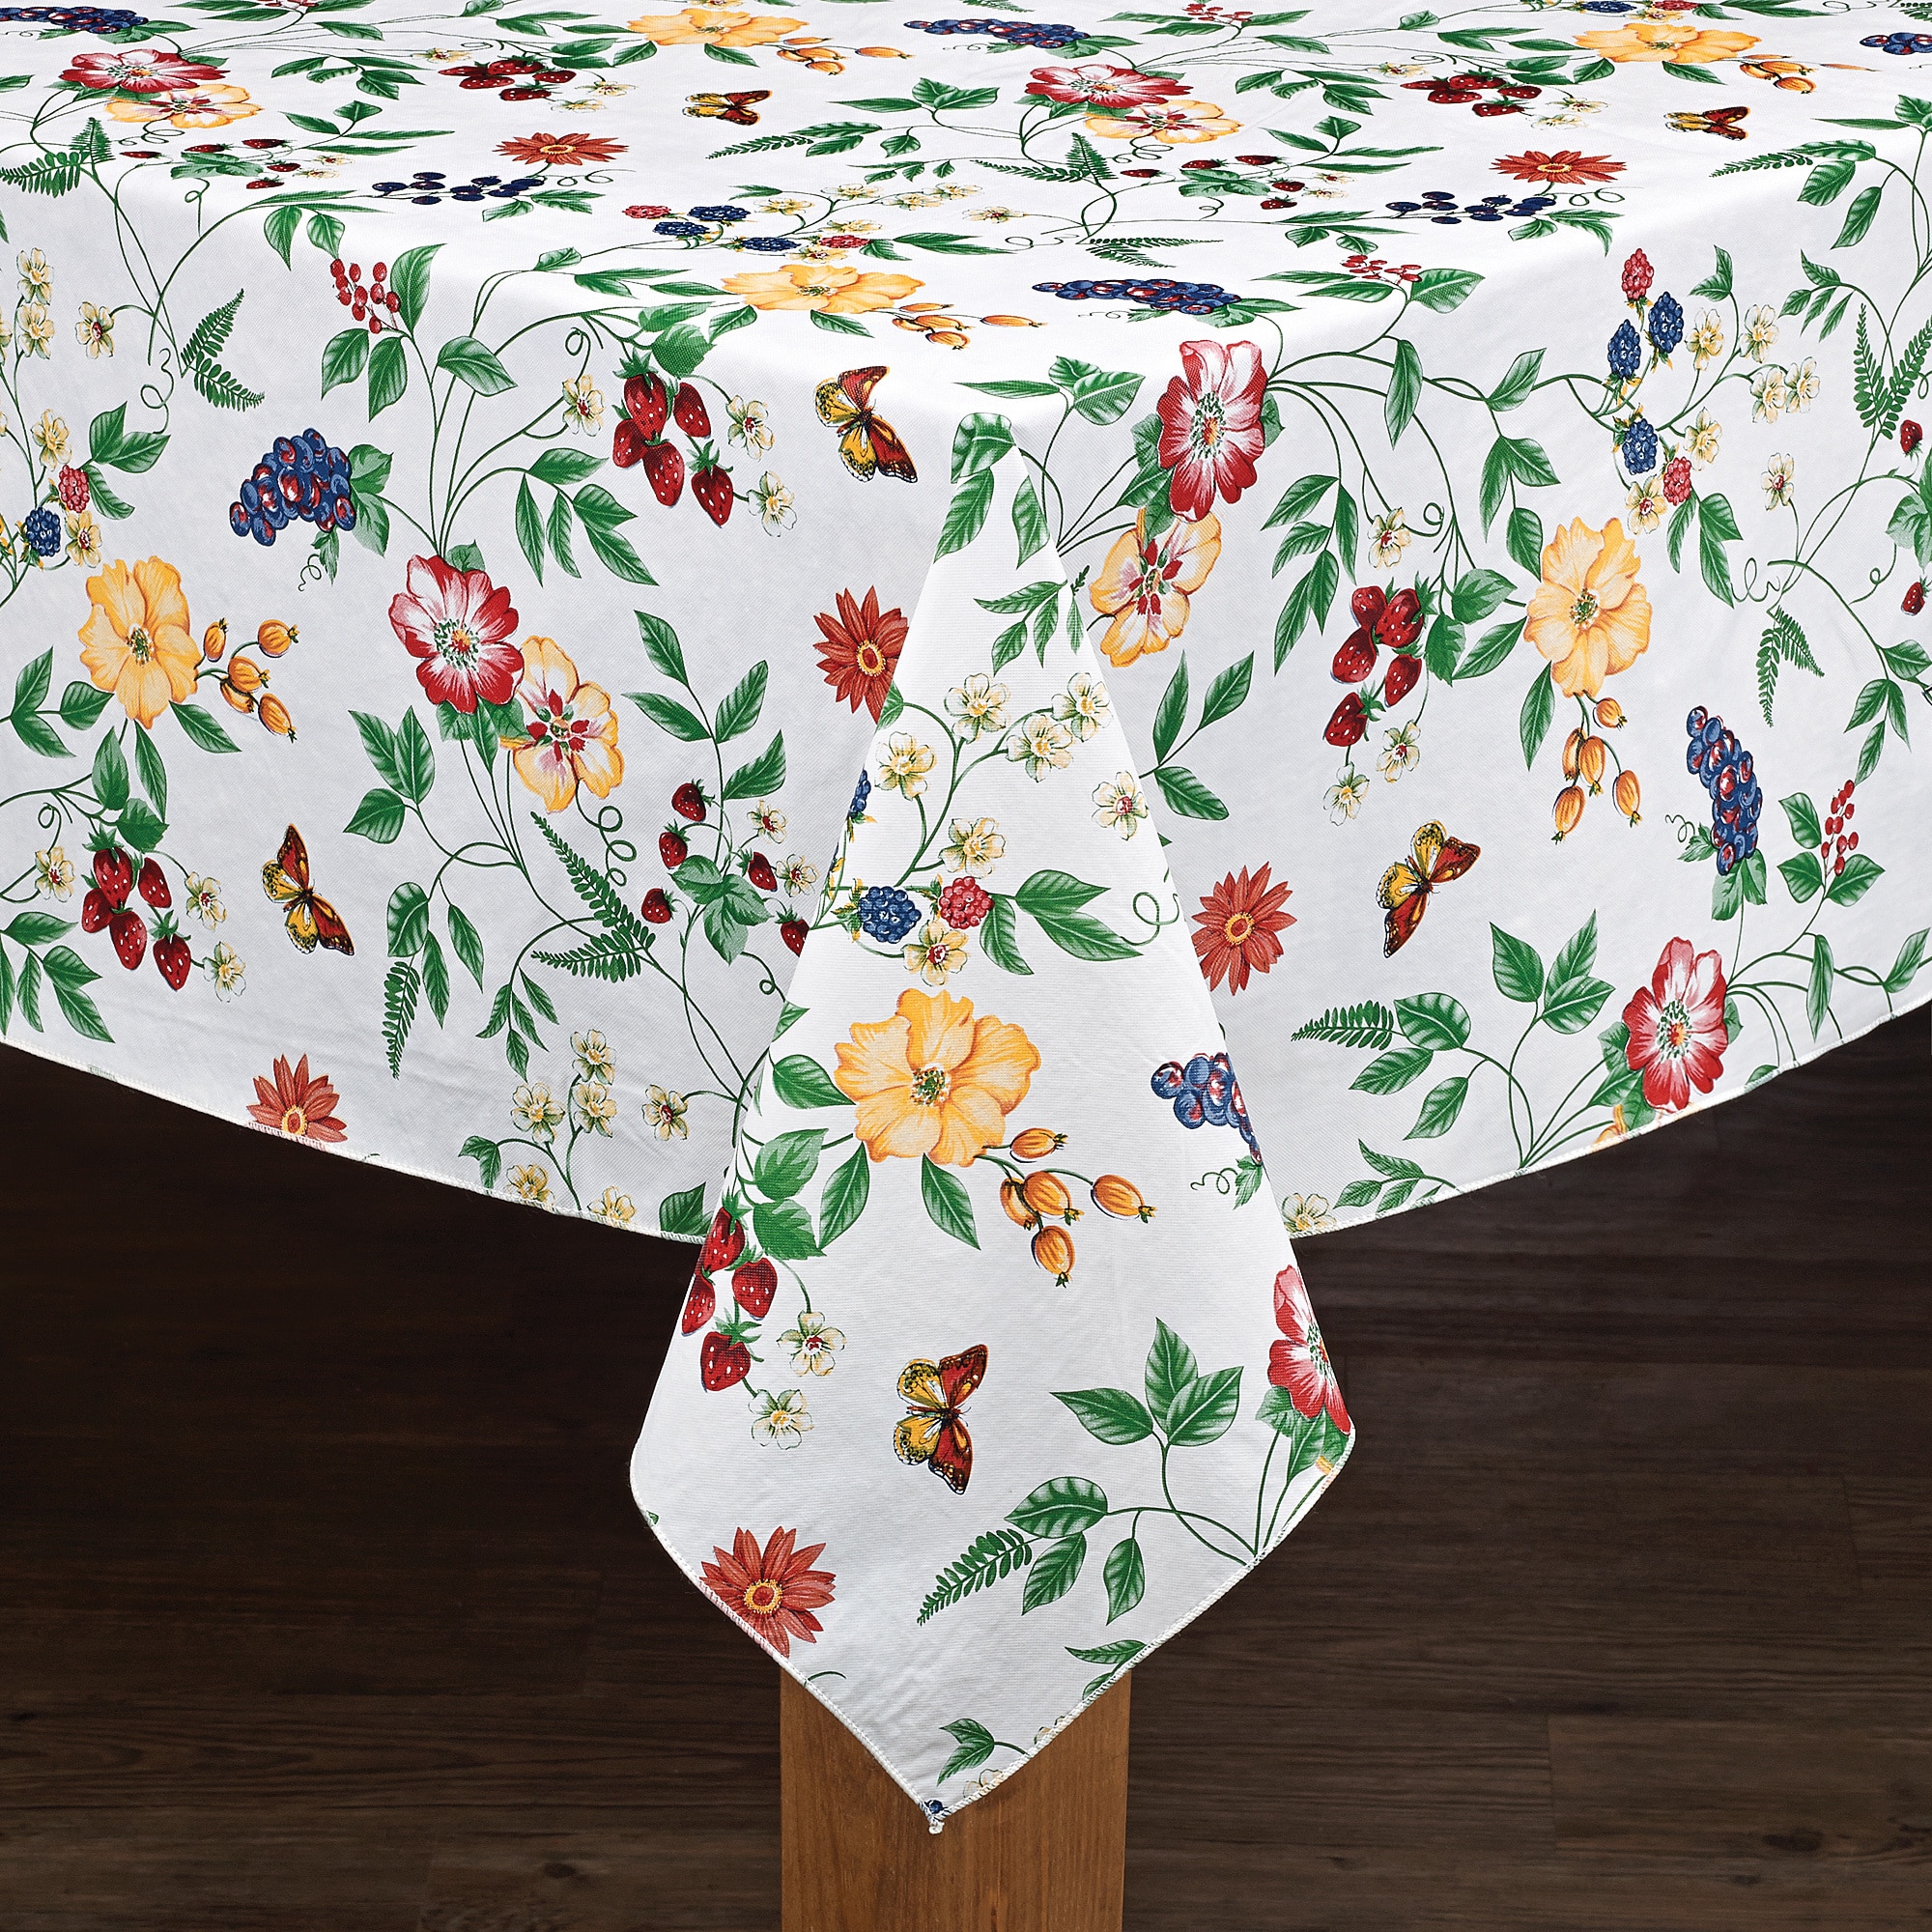 70 in. Round Oval Tablecloths - Bed Bath & Beyond